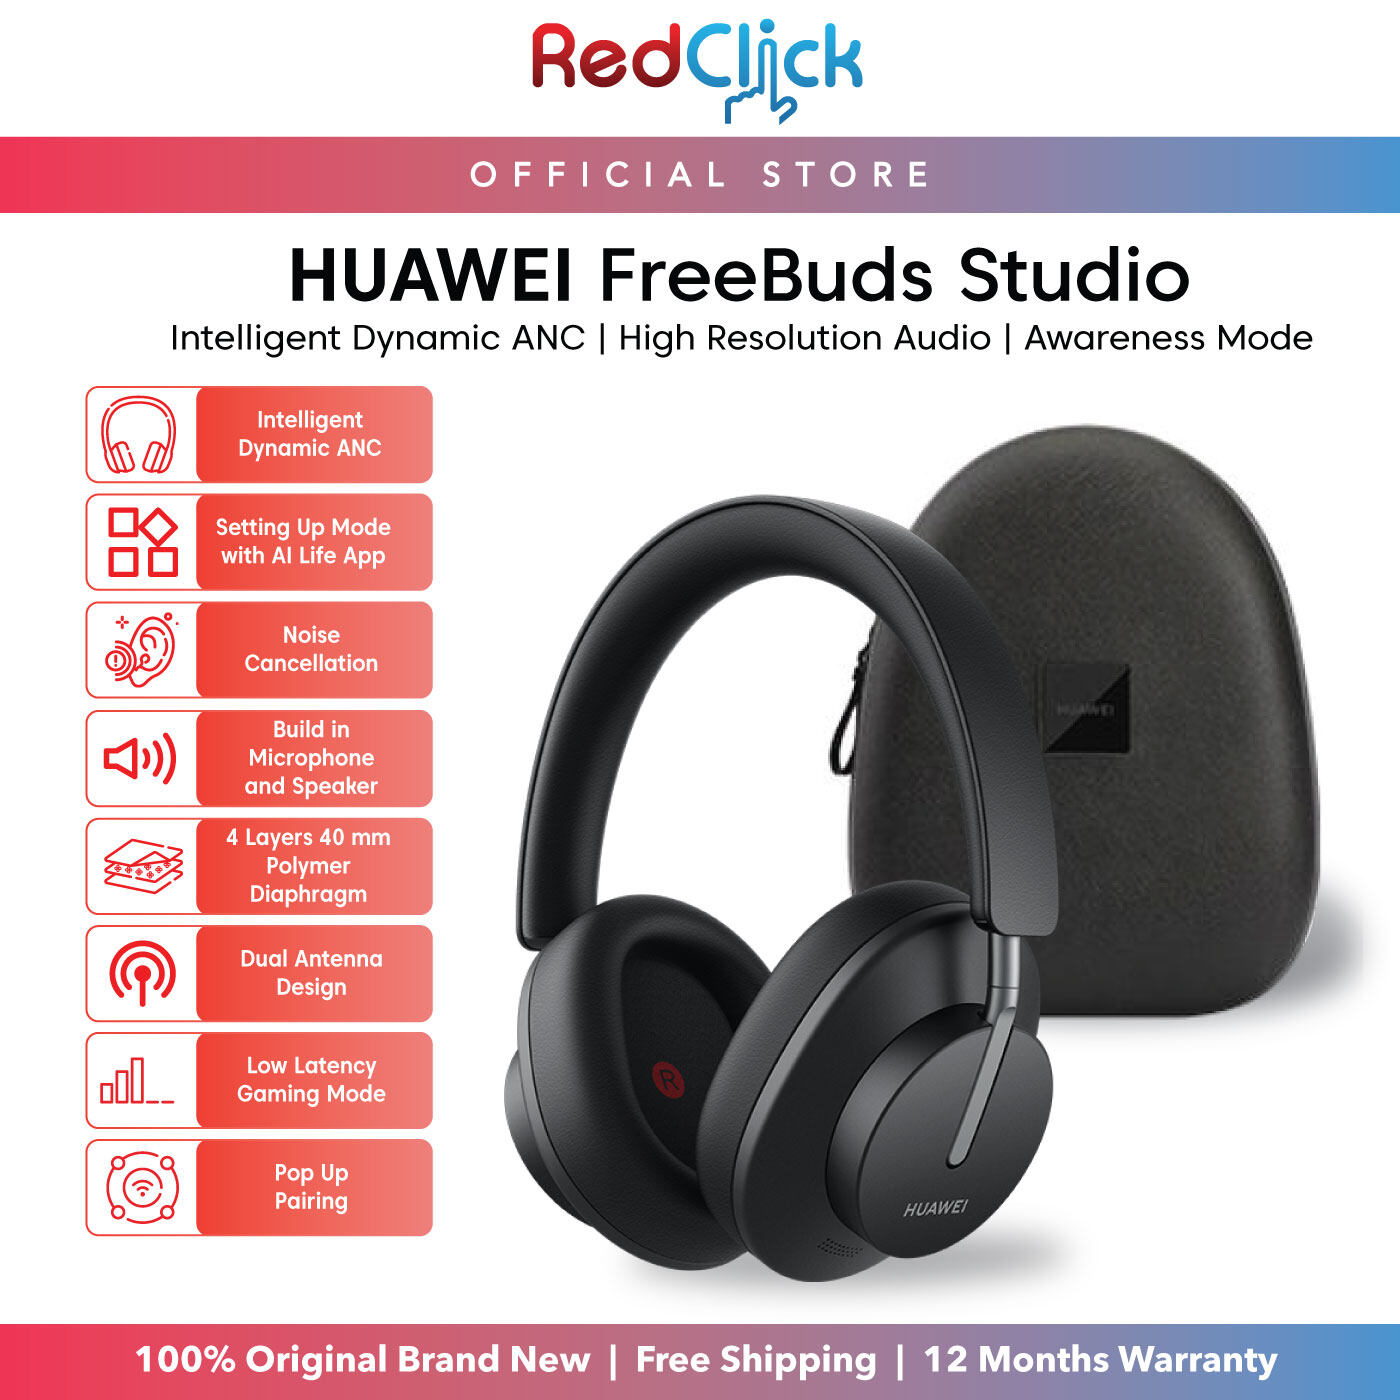 Huawei Freebuds Studio / M0001 Wireless Bluetooth Headphone with Intelligent ANC Up To 24Hours Music Playback Support Quick Charging Huawei Original Product